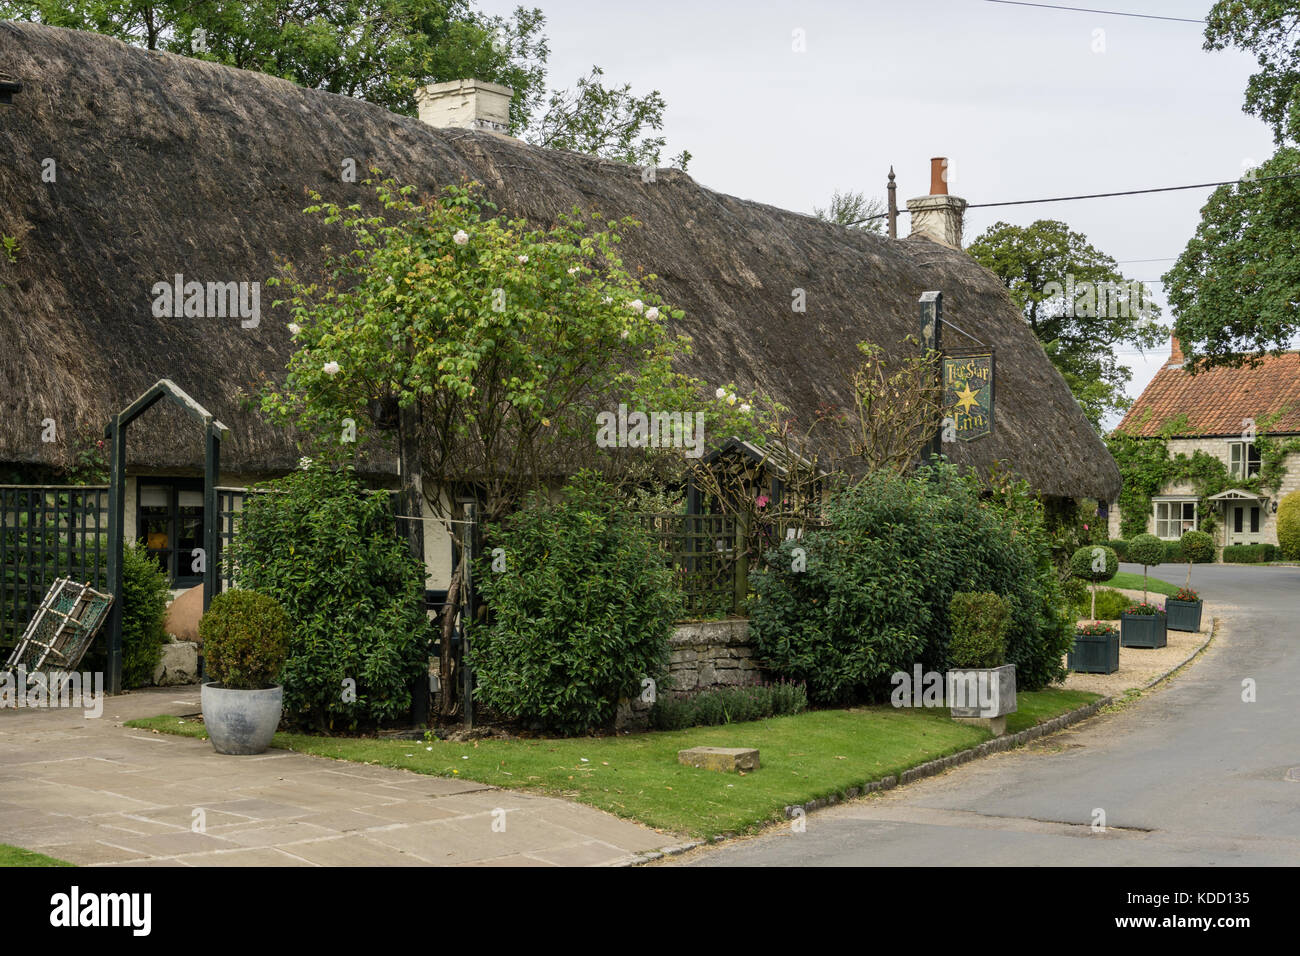 The Star Inn at Harome, an award winning gastropub with rooms, located in a 14th century building; Yorkshire, UK Stock Photo